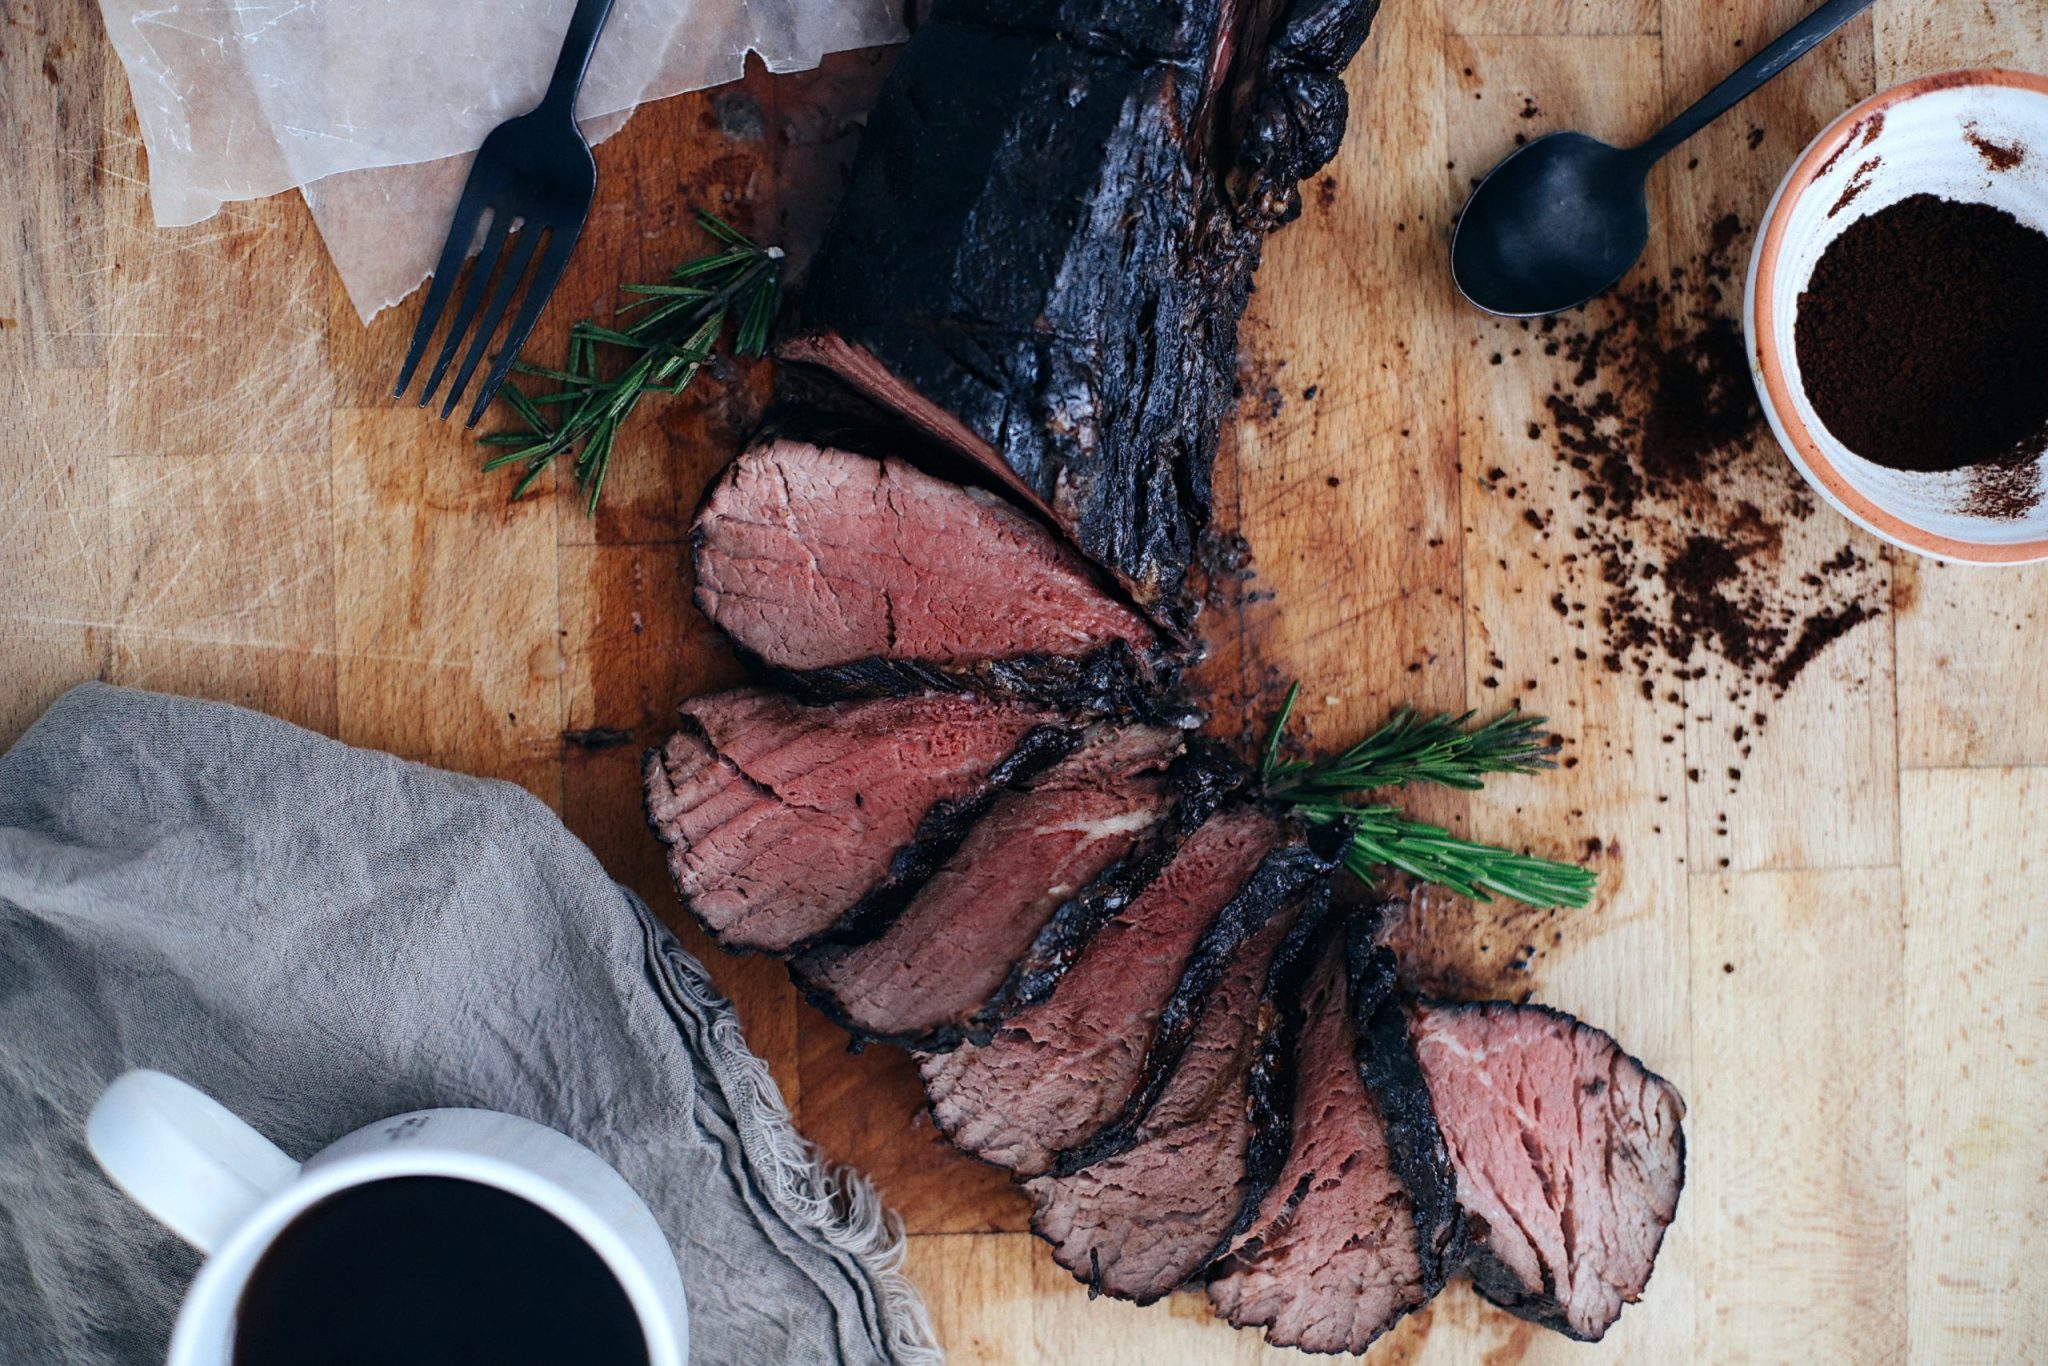 Best Way to Cook Beef Tenderloin – Espresso Crusted Chateaubriand